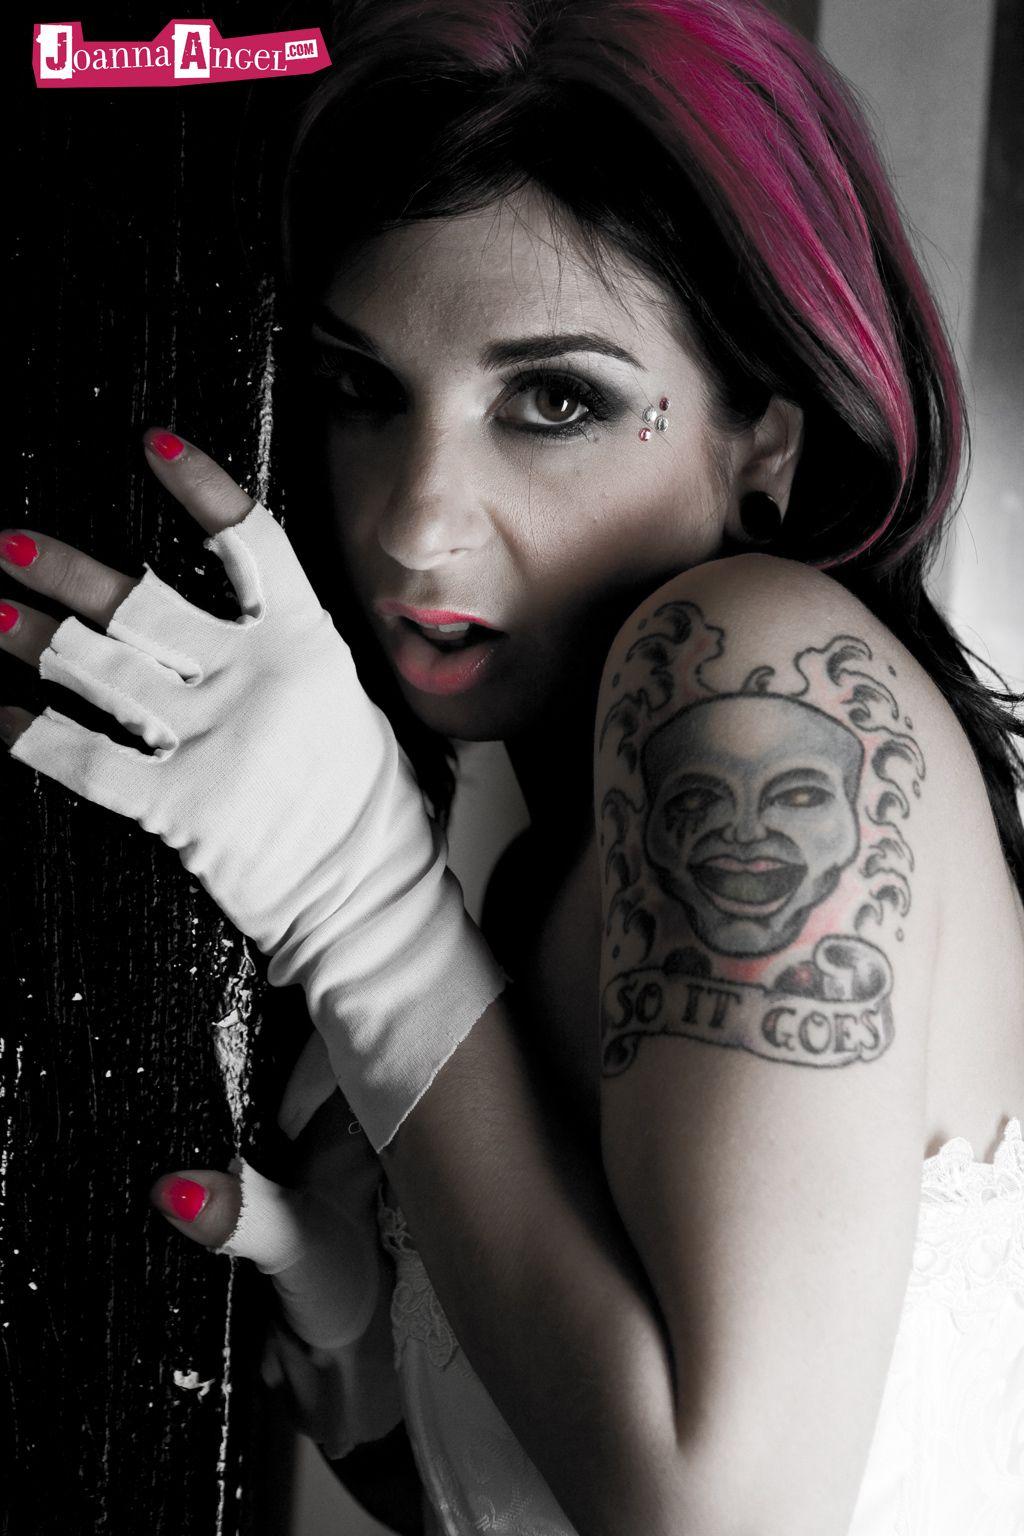 Pictures of Joanna Angel giving you some b&w gothic glam #55530096